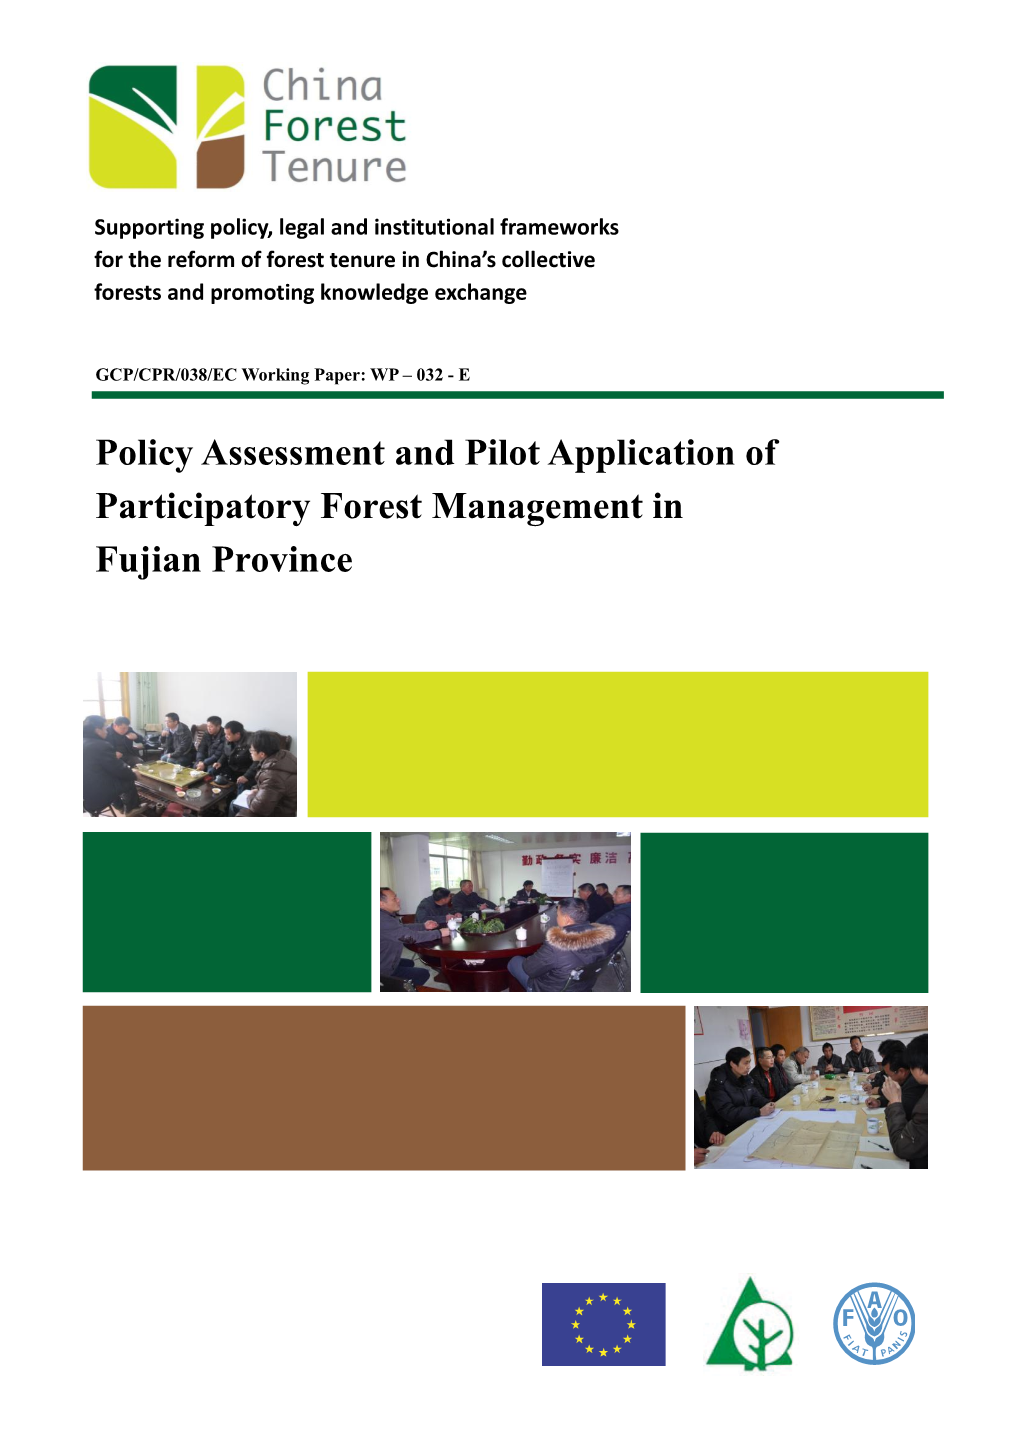 Policy Assessment and Pilot Application of Participatory Forest Management in Fujian Province